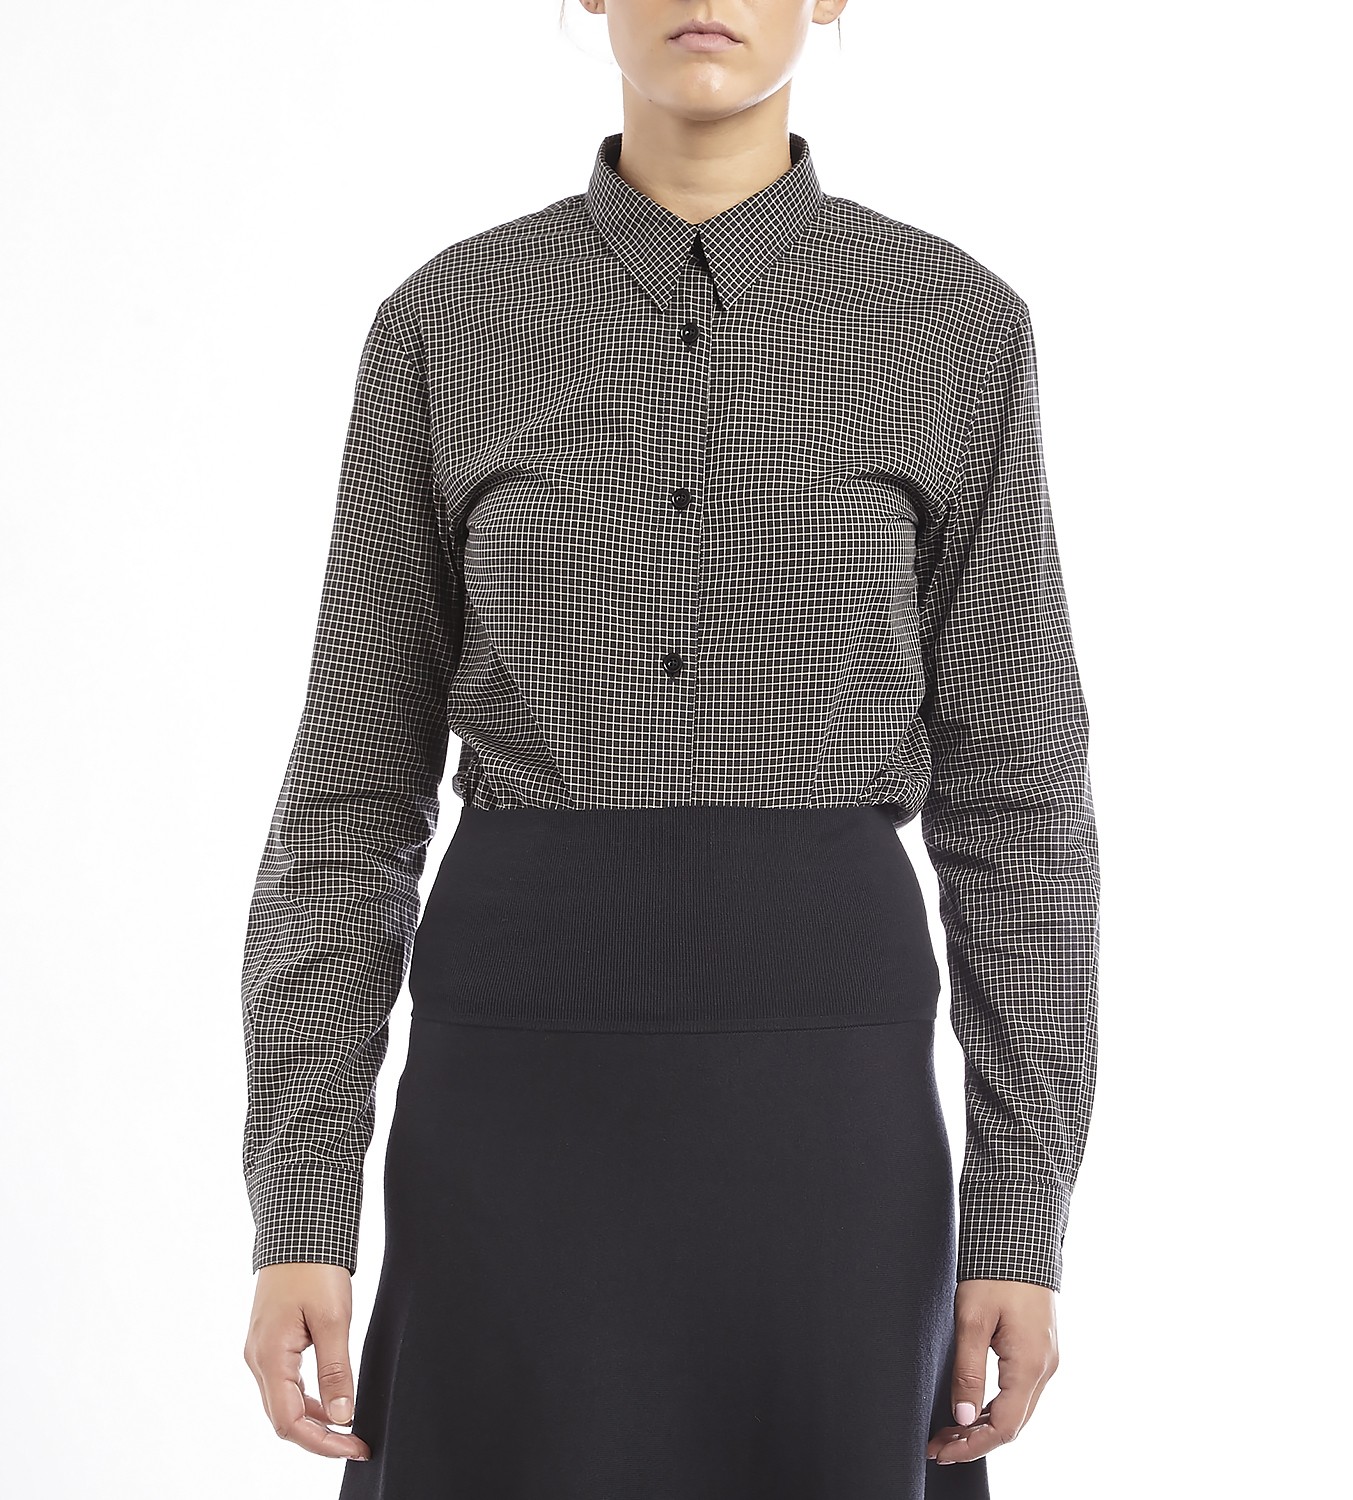 Lemaire | PRINTED POINTED COLLAR SHIRT | Women's blouses & shirts ...